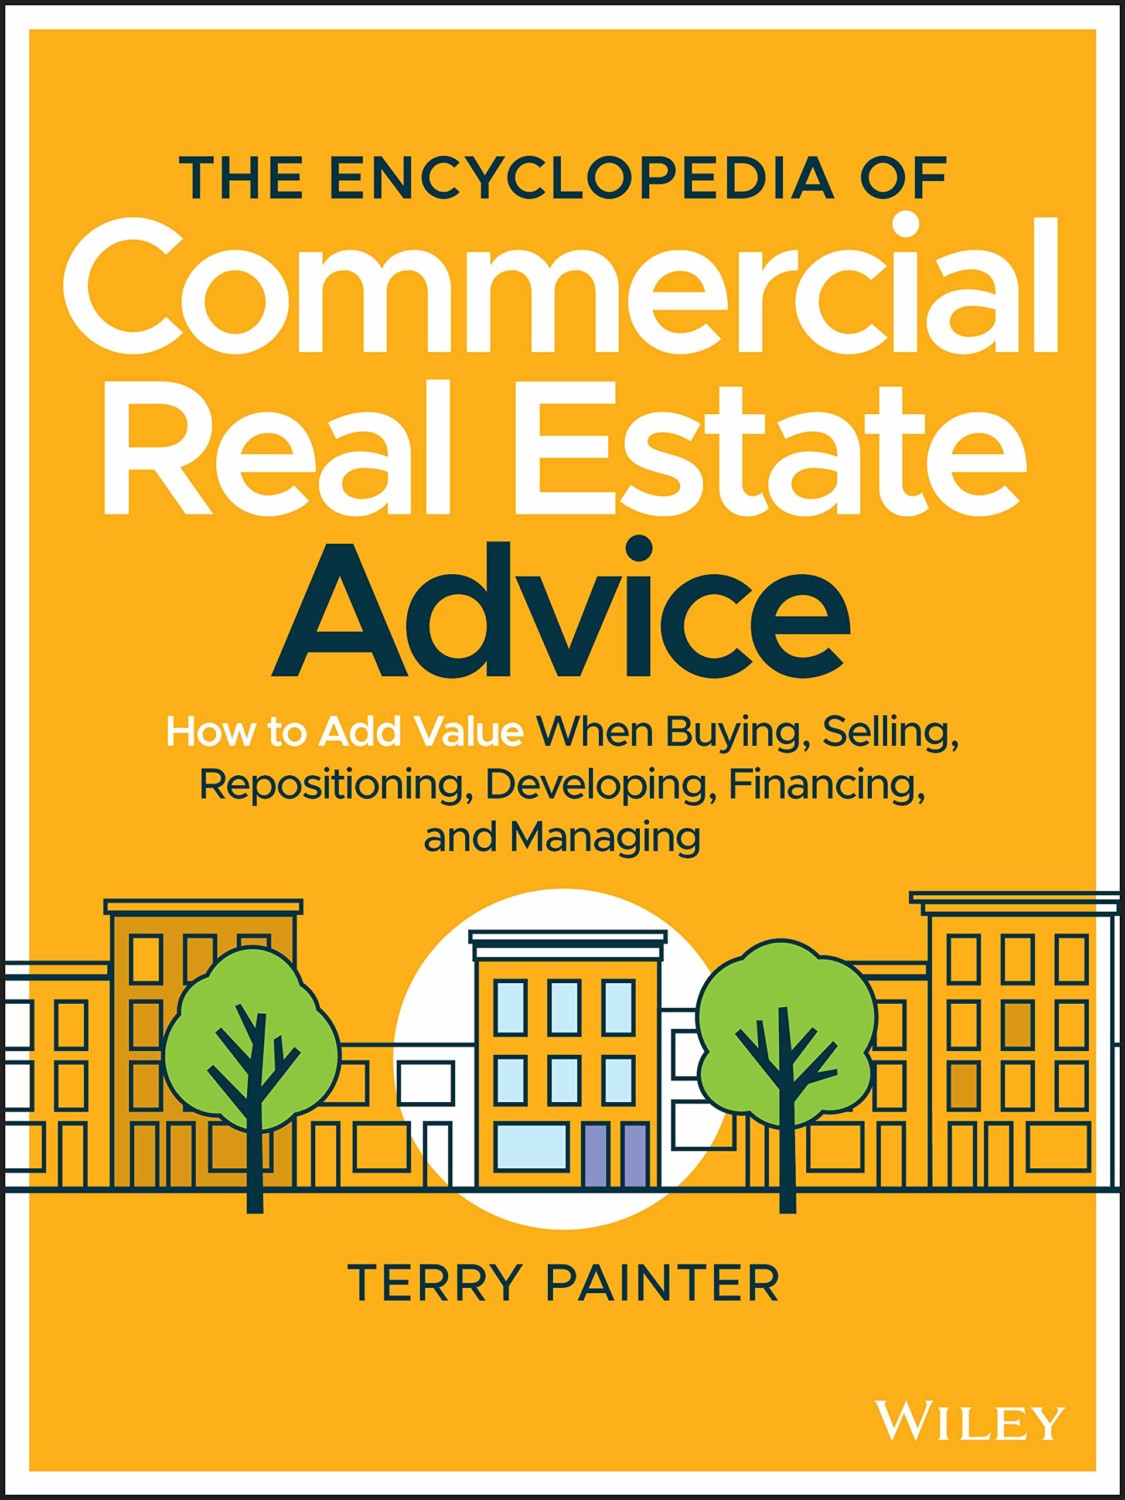 How To Find Commercial Real Estate Investors How to Find Good Deals